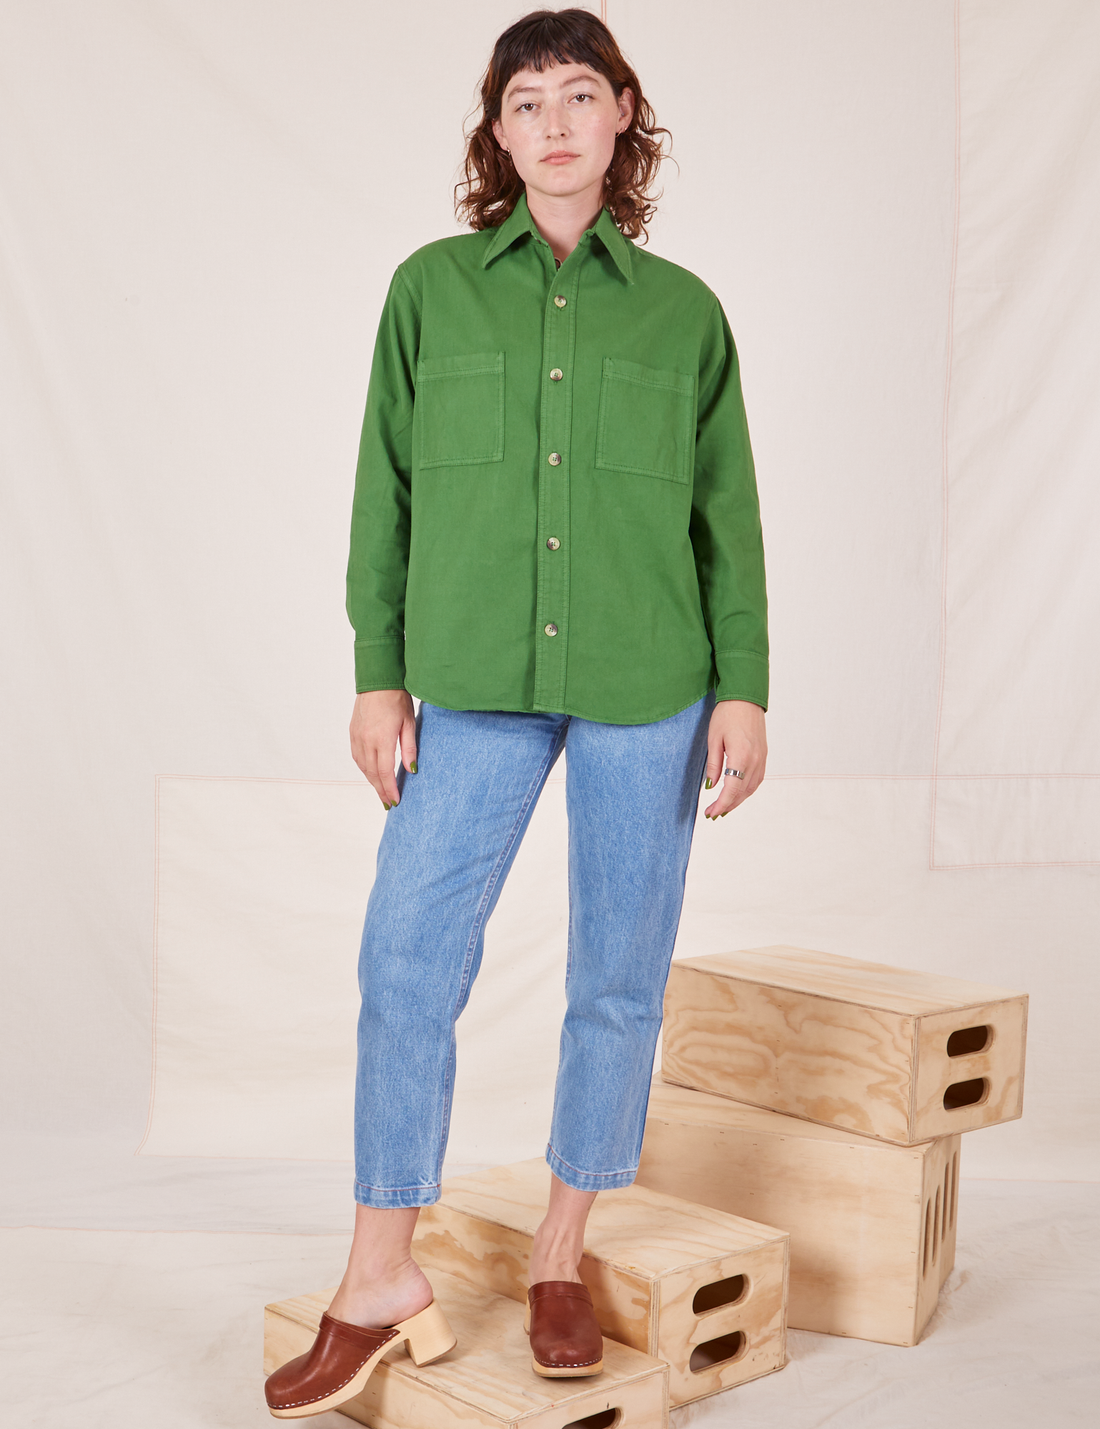 Alex is wearing a buttoned up Oversize Overshirt in Lawn Green and light wash Frontier Jeans